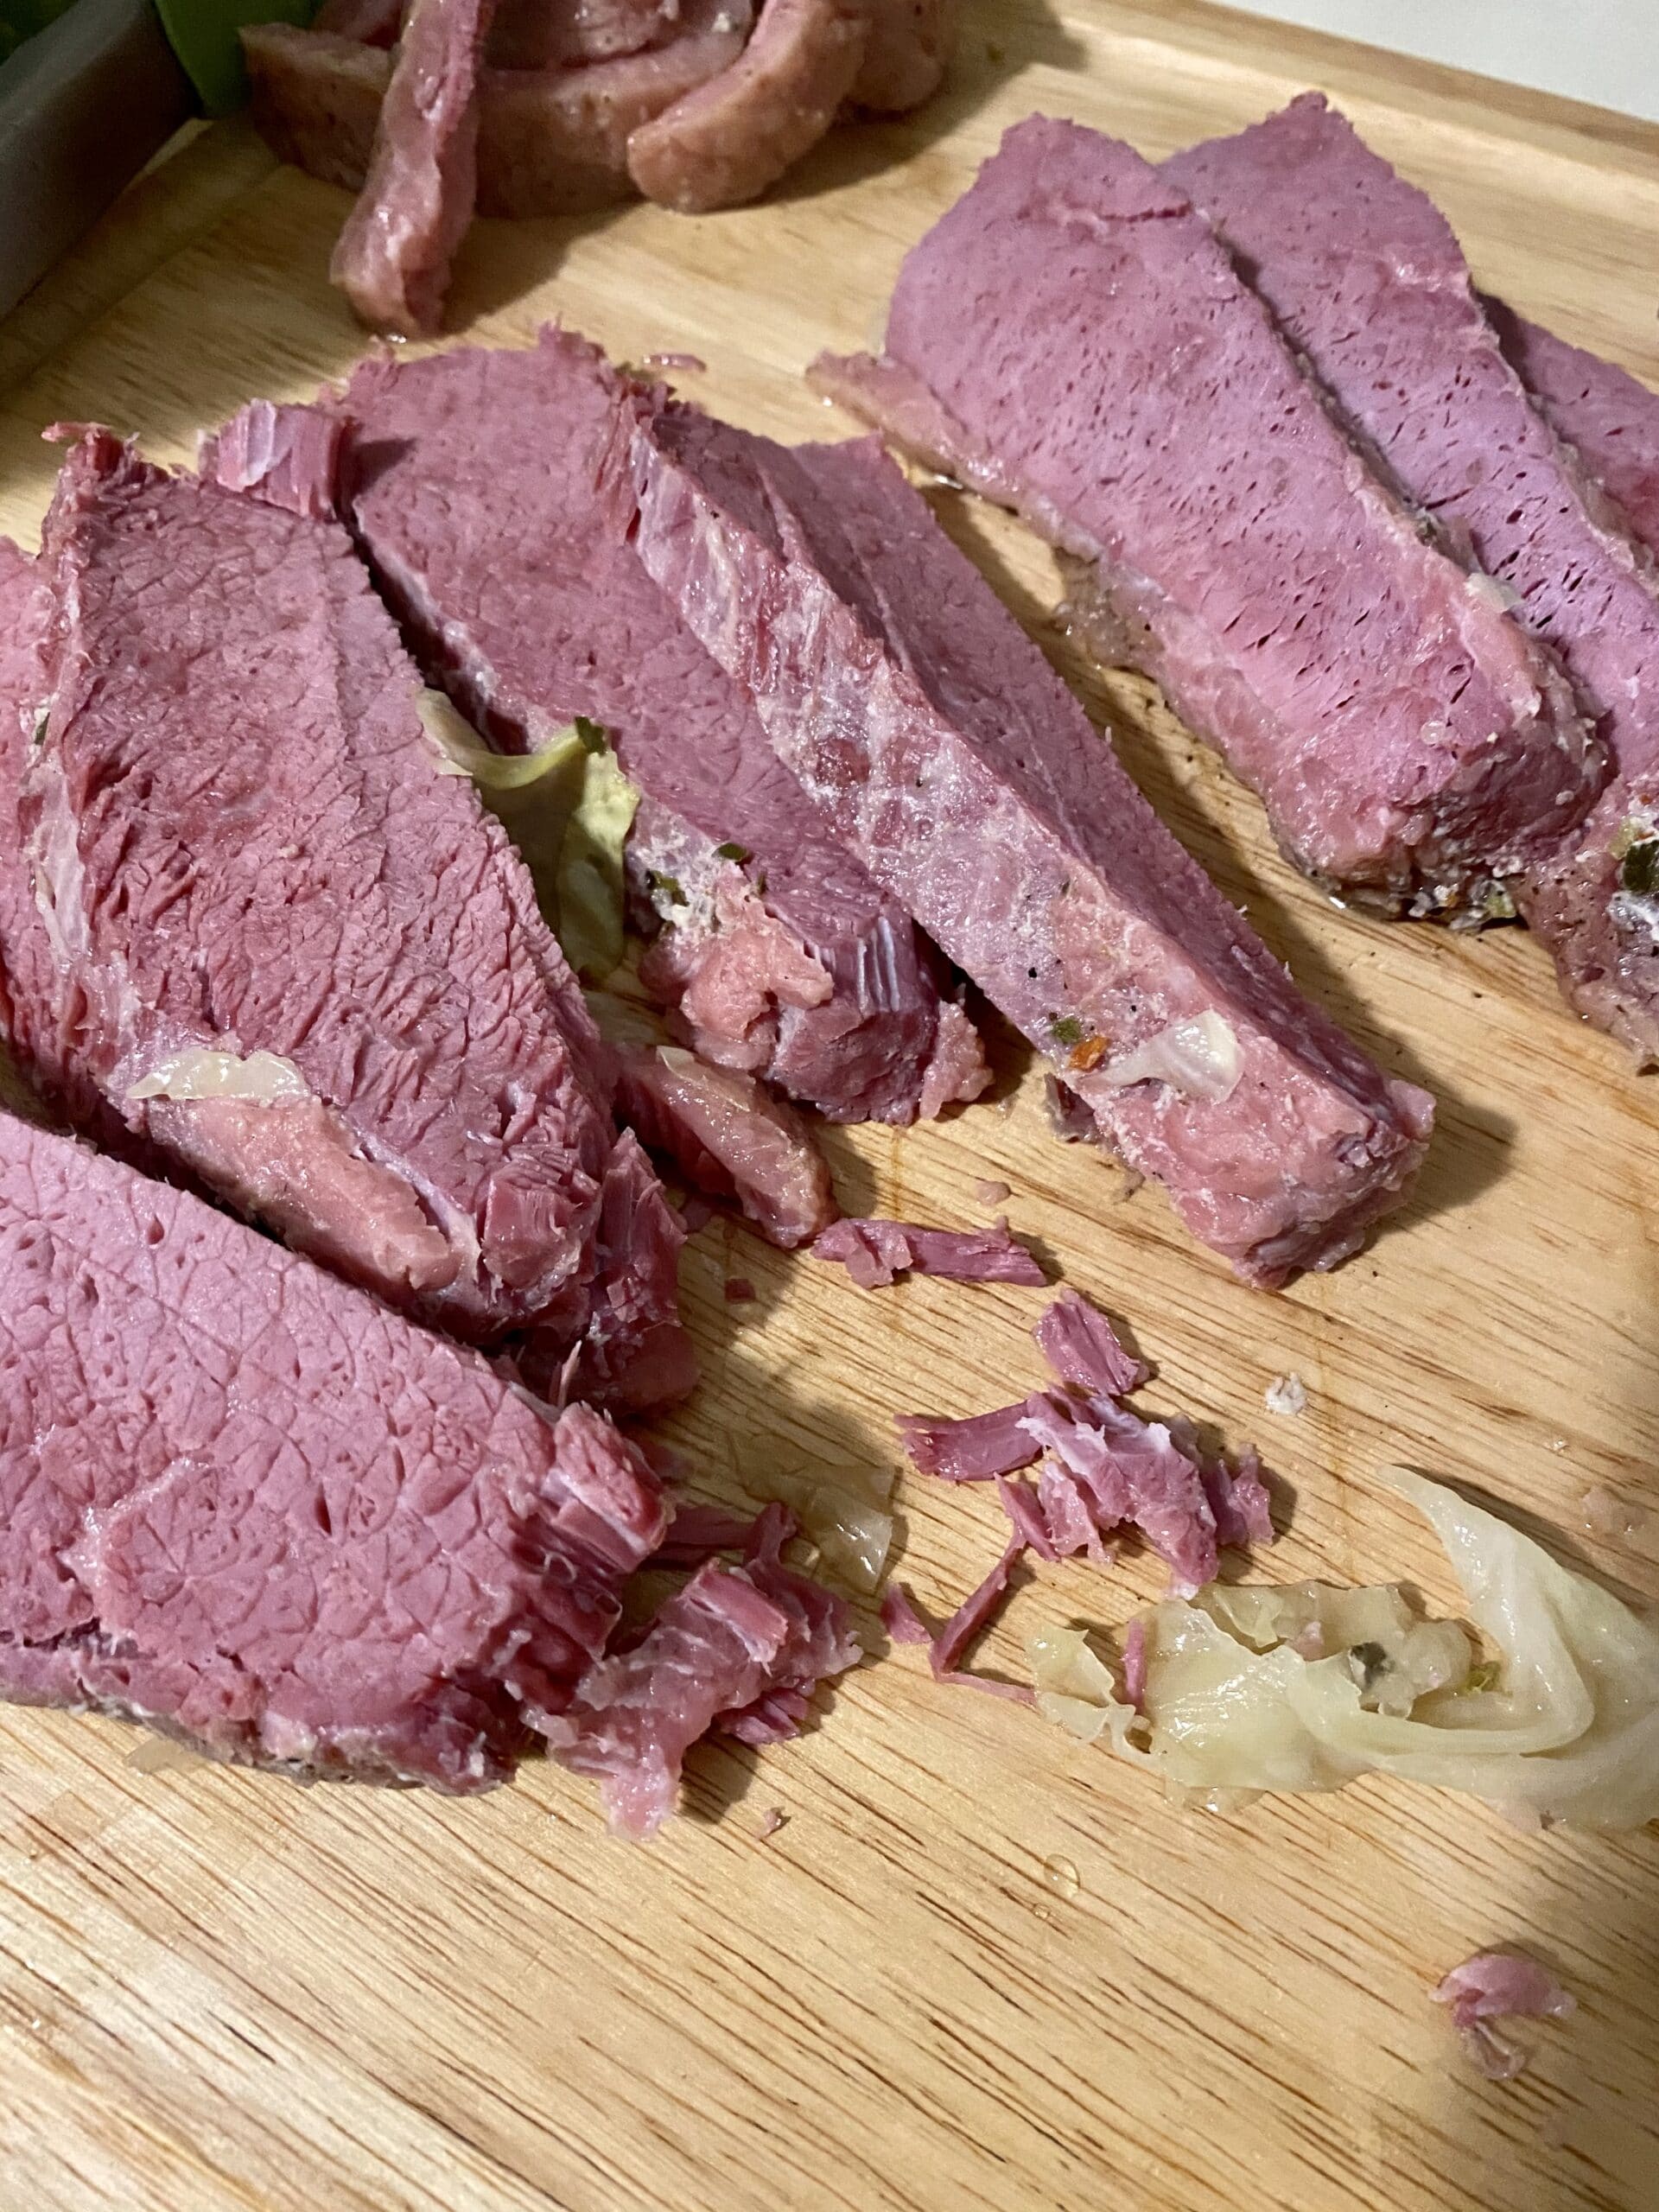 slow cooked corned beef sliced and ready to serve.